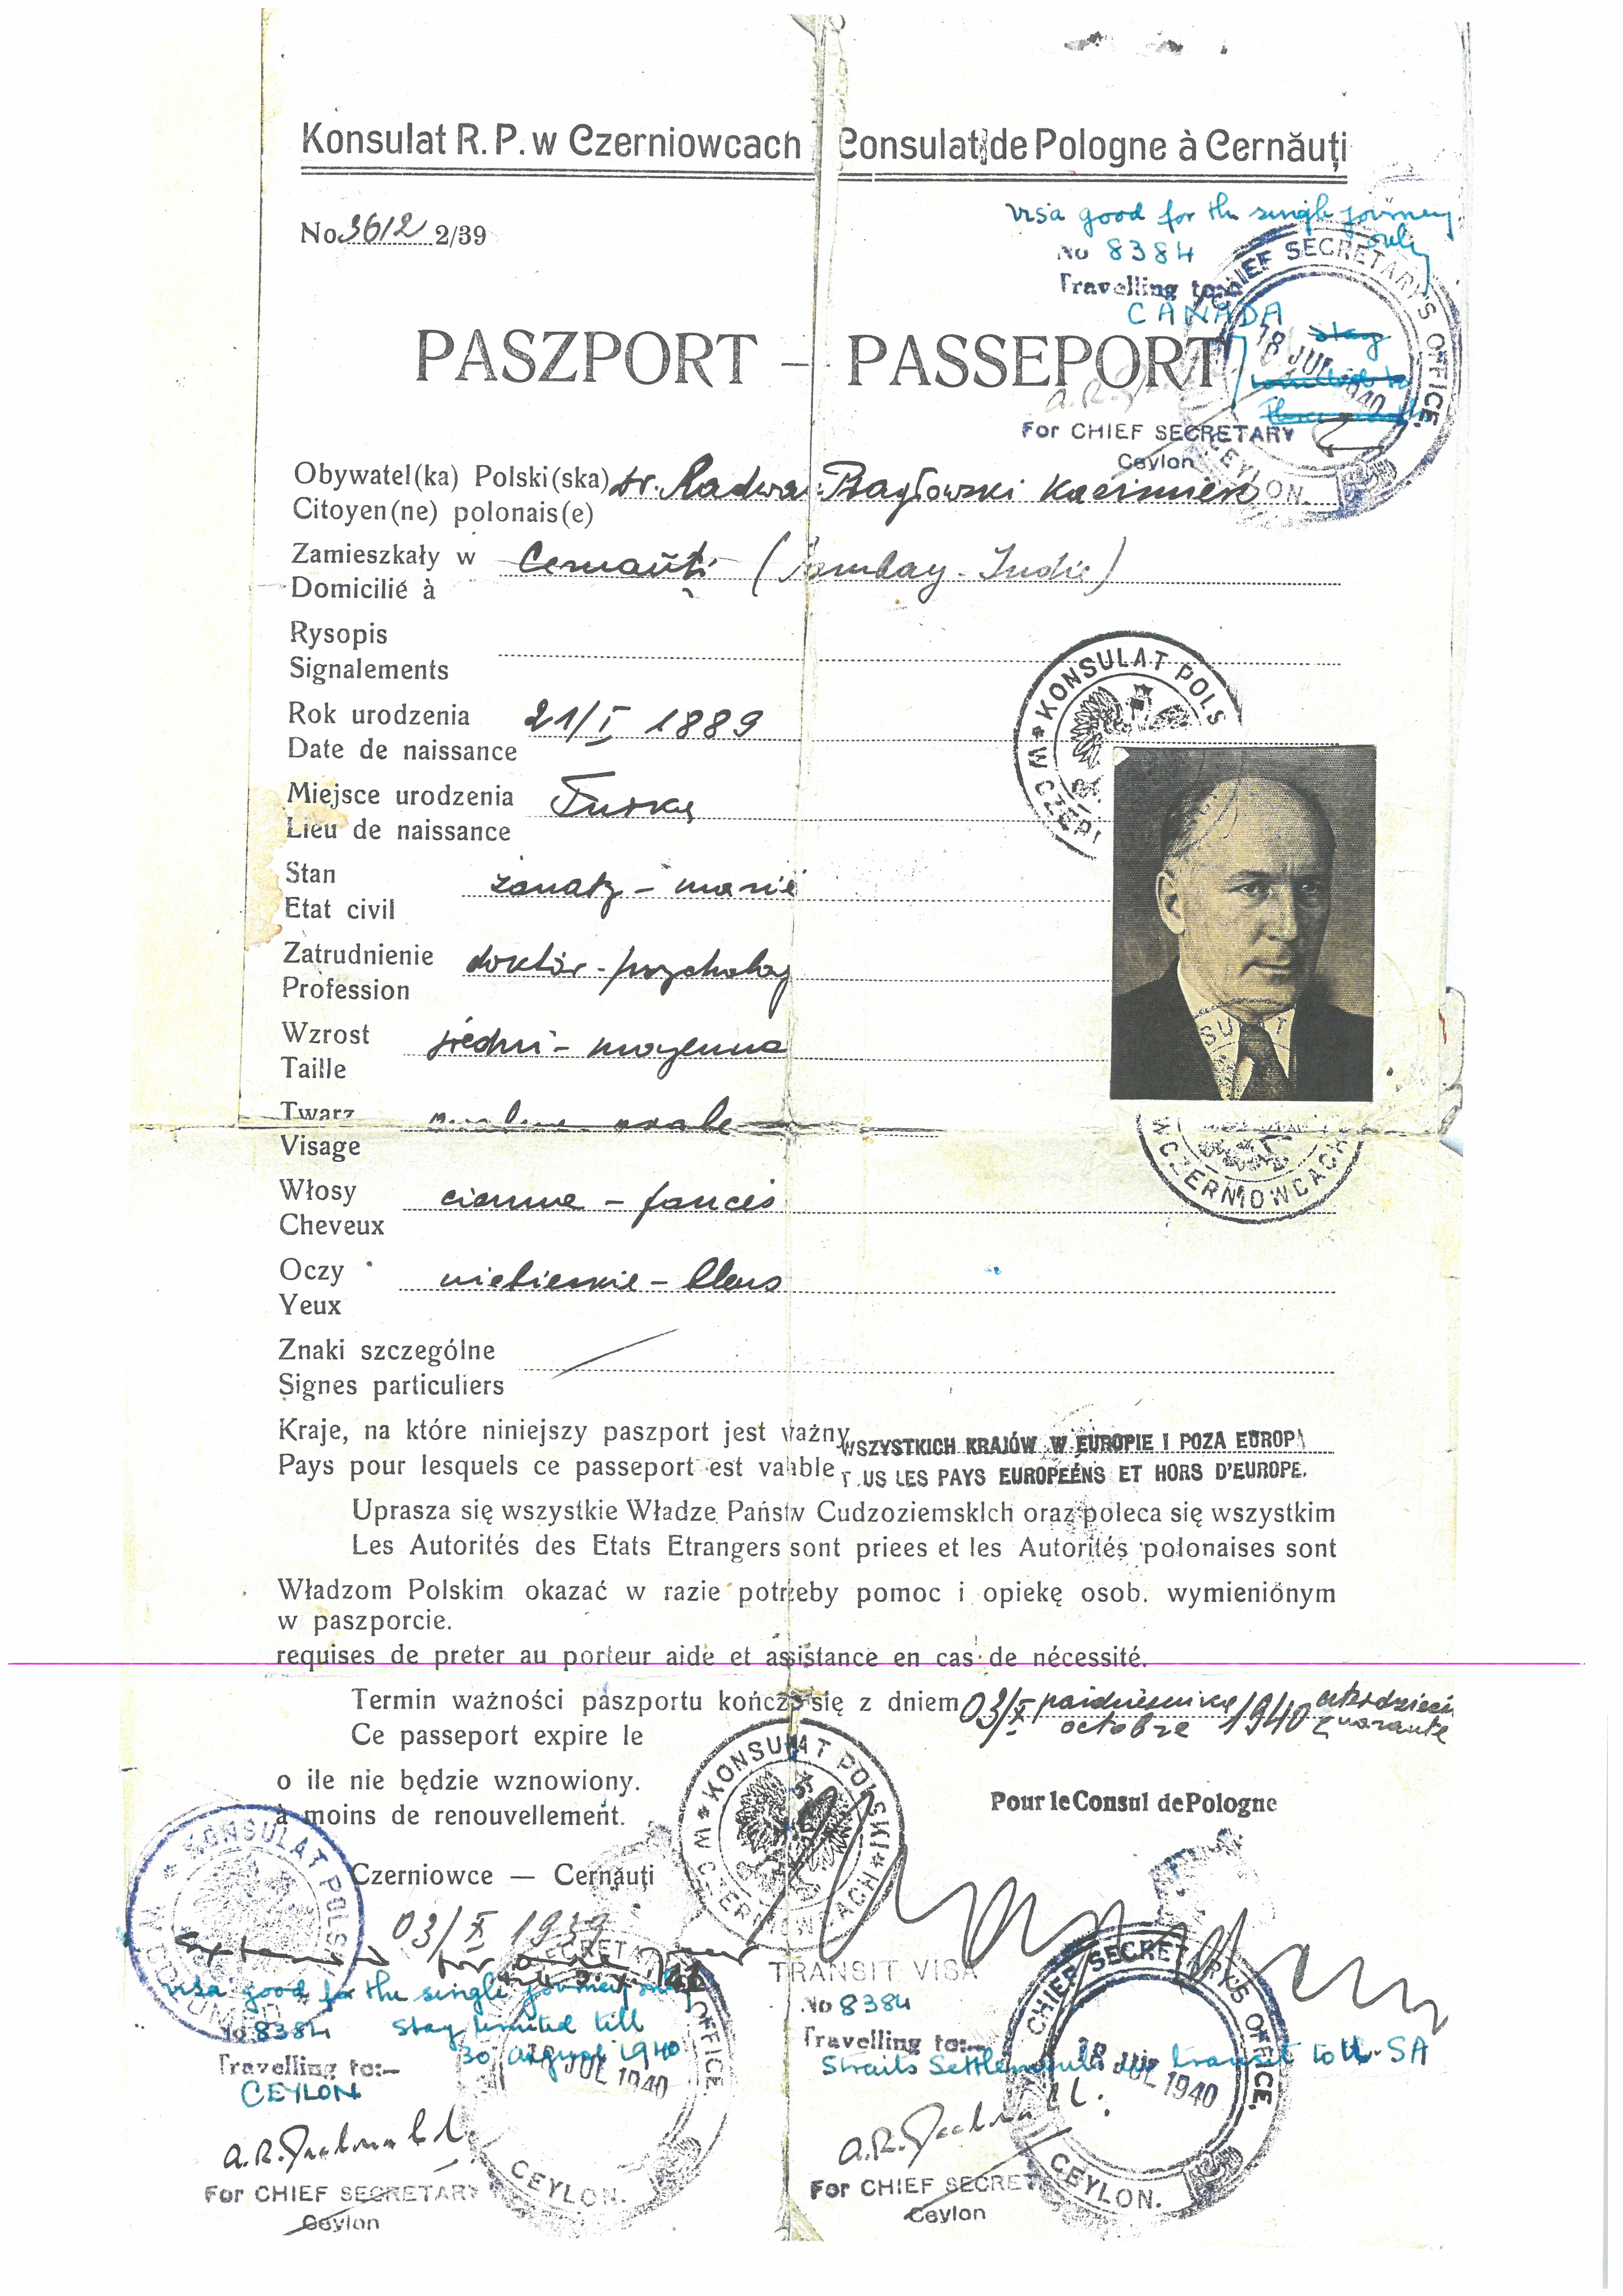 A passport issued in October 1939 at the Consulate of the Republic of Poland in Chernivtsi.